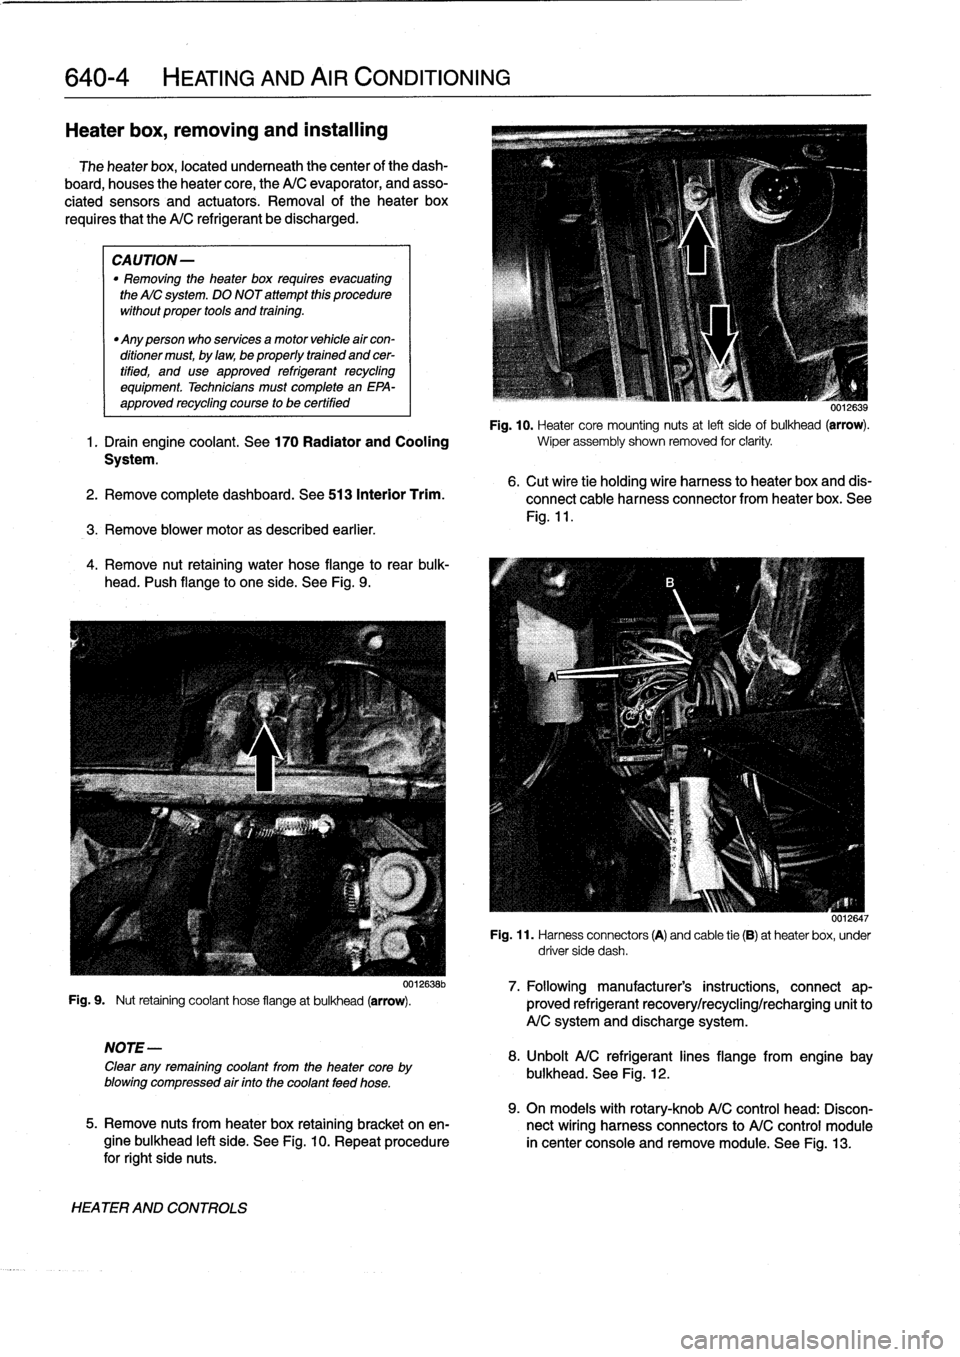 BMW 318i 1998 E36 Owners Manual 
640-4

	

HEATING
AND
AIR
CONDITIONING

Heater
box,
removing
and
installing

The
heater
box,
located
underneath
thecenter
of
the
dash-

board,
houses
theheater
core,
the
A/C
evaporator,
and
asso-

ci